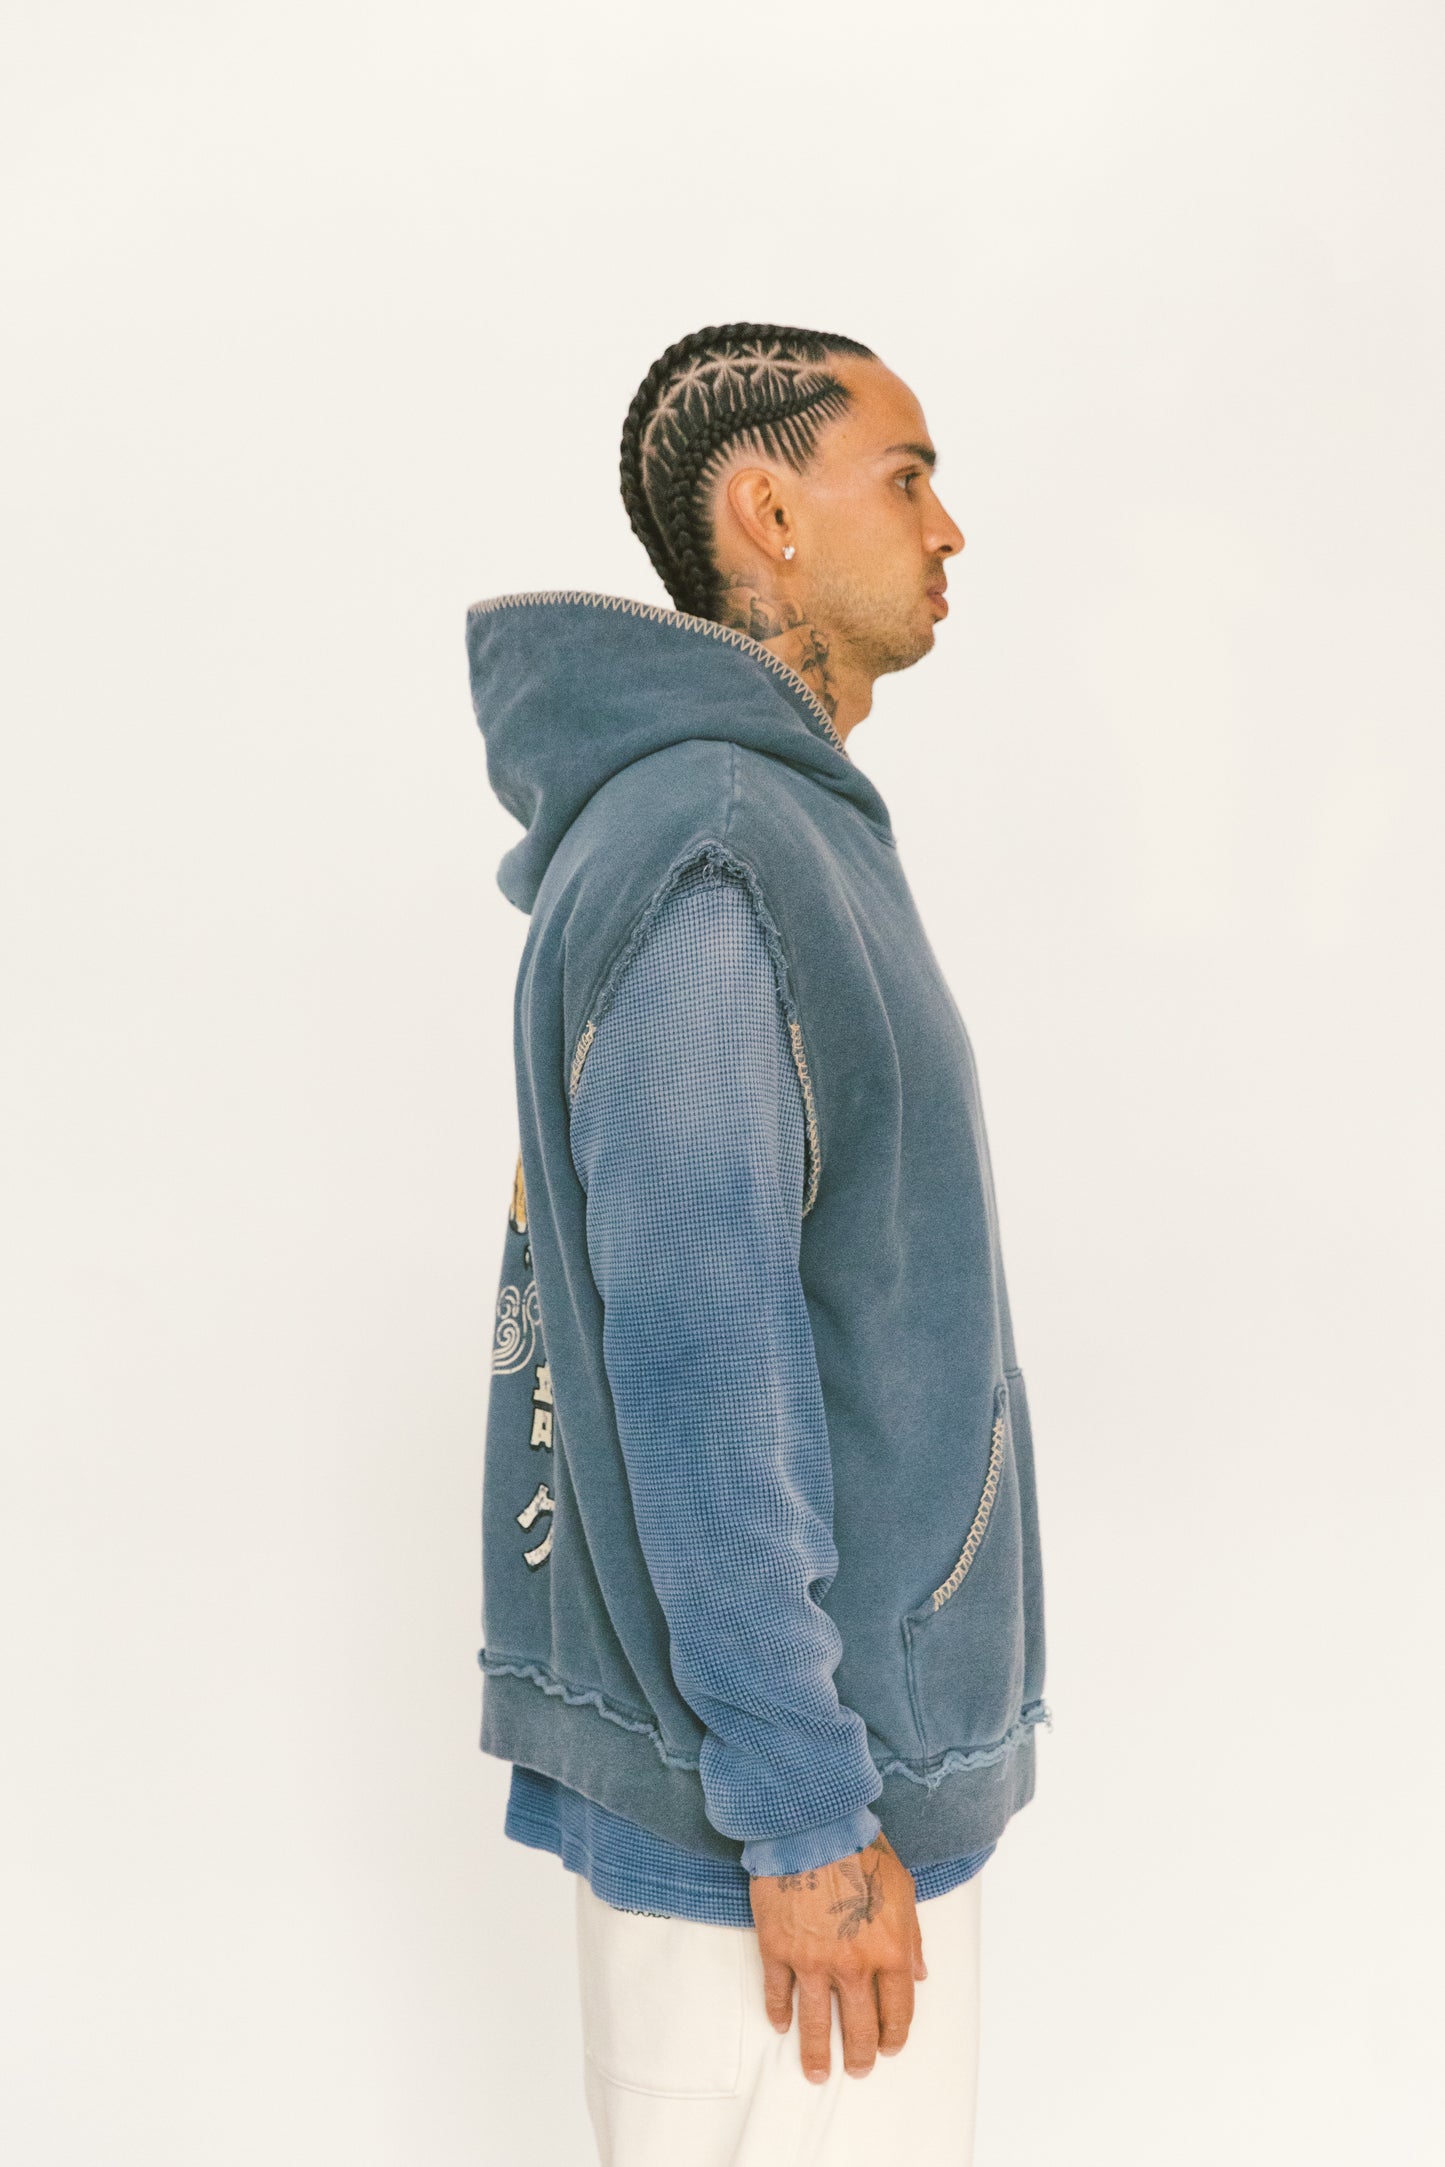 Hand Stitched Frost Blue Sleeveless Hoodie